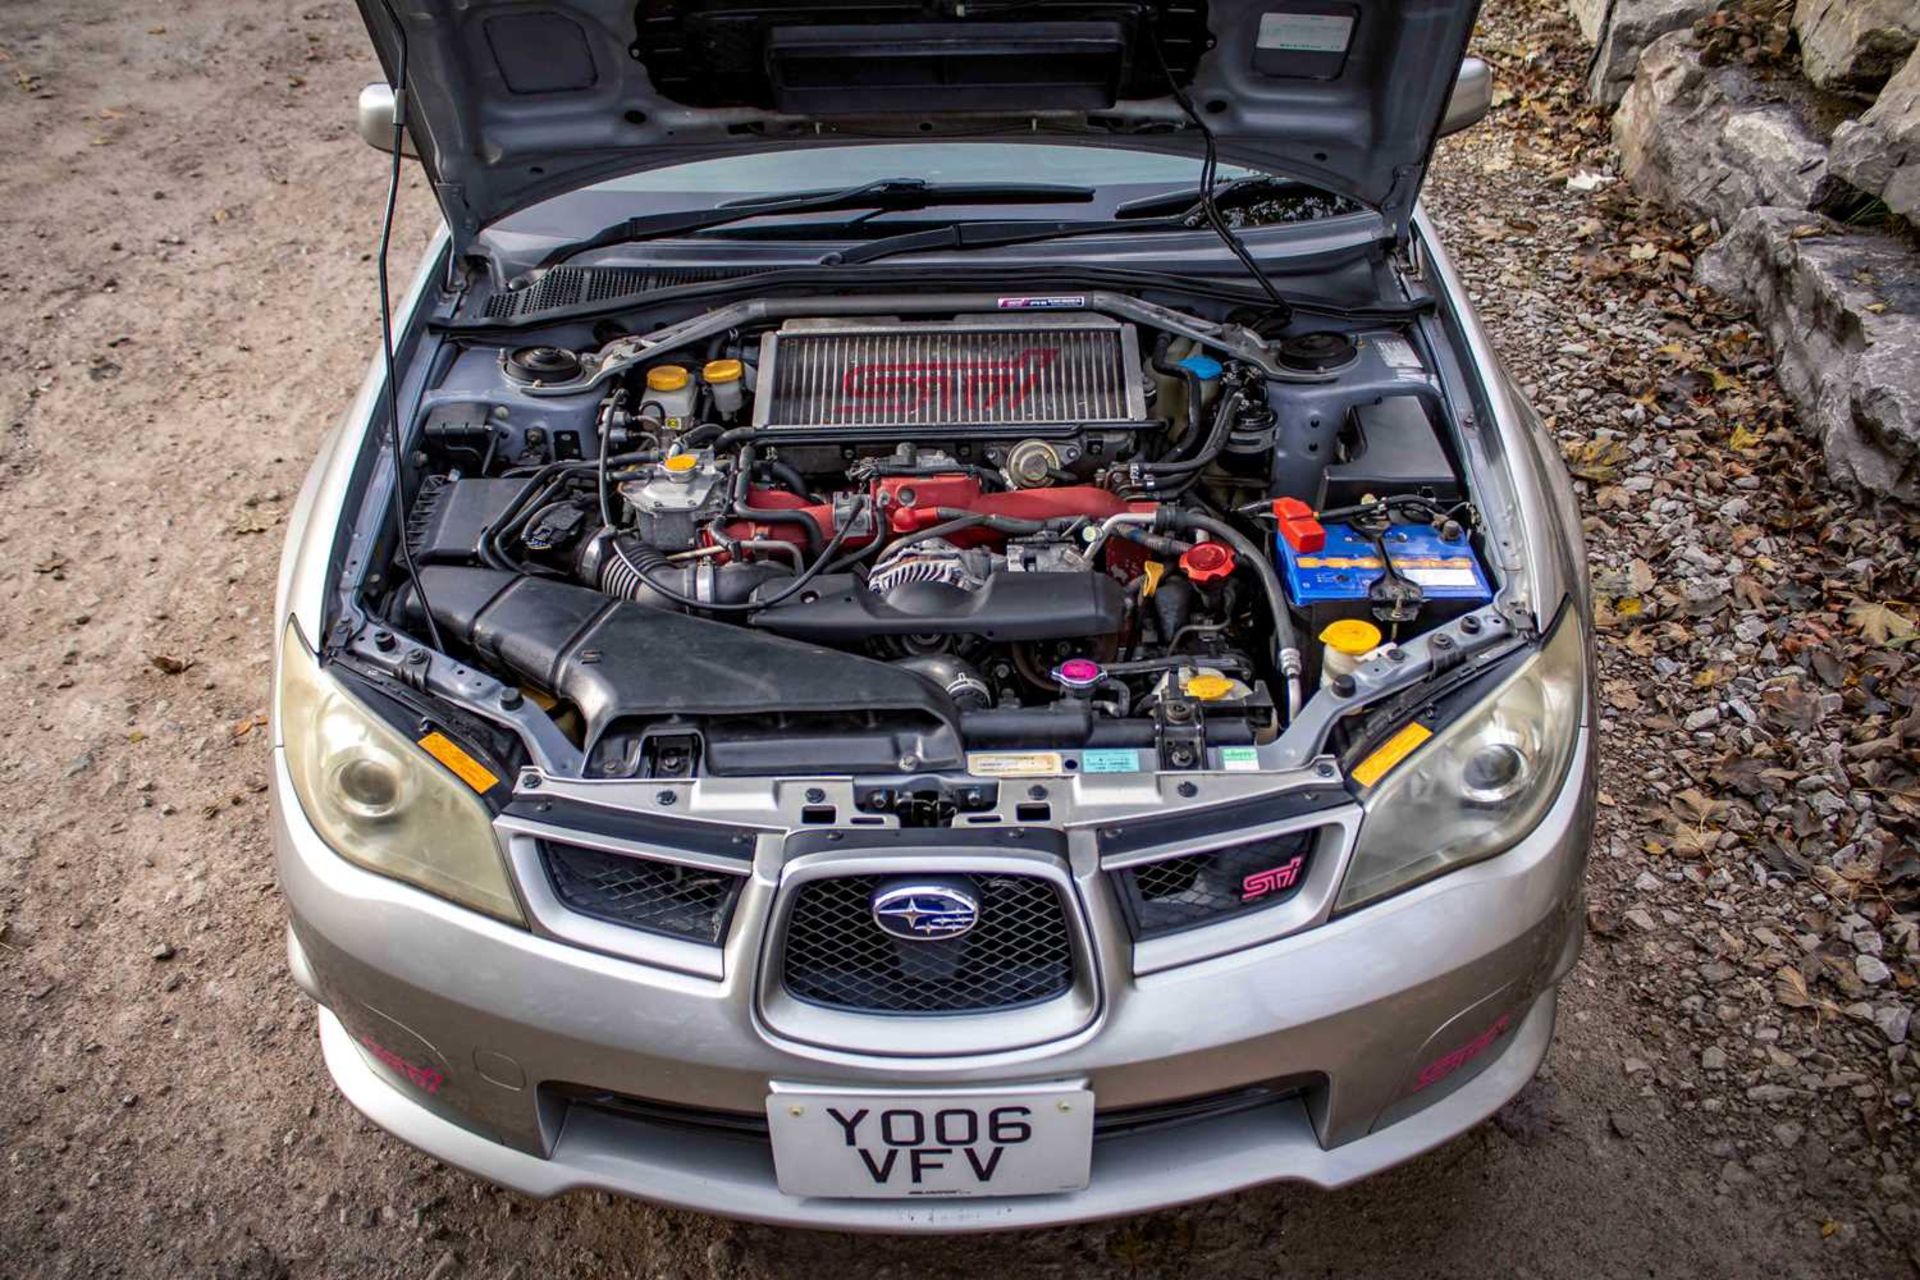 2006 Subaru Impreza WRX STi Featuring a plethora of desirable upgrades, supported by a dyno printout - Image 98 of 103